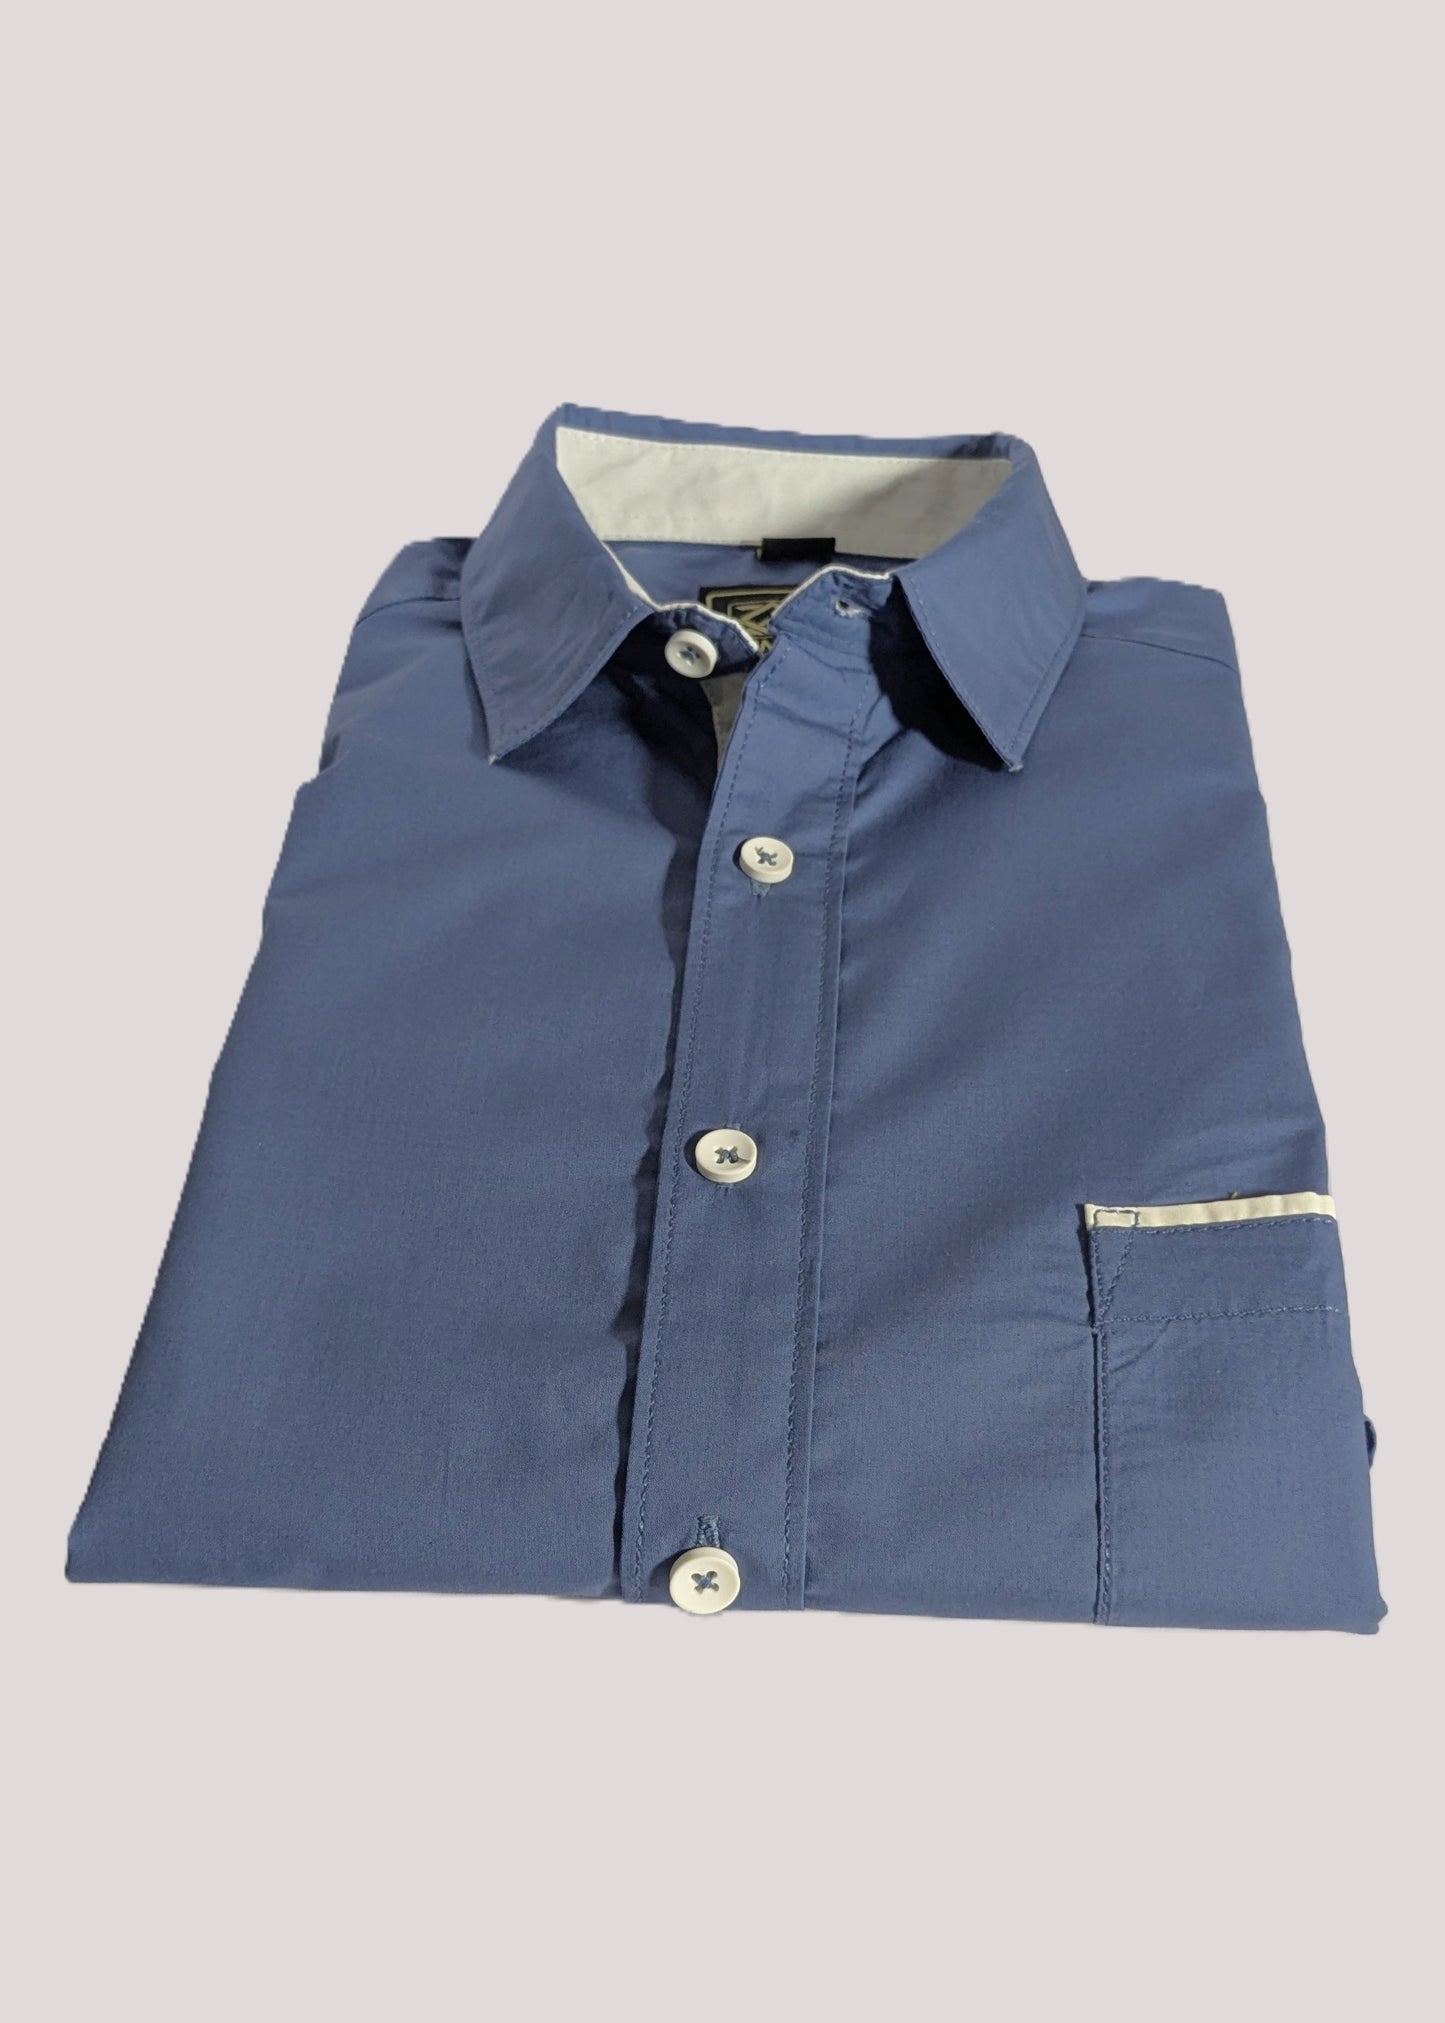 Ash Blue Contrast Men Shirt in Cotton with Full Sleeves & Single Pocket